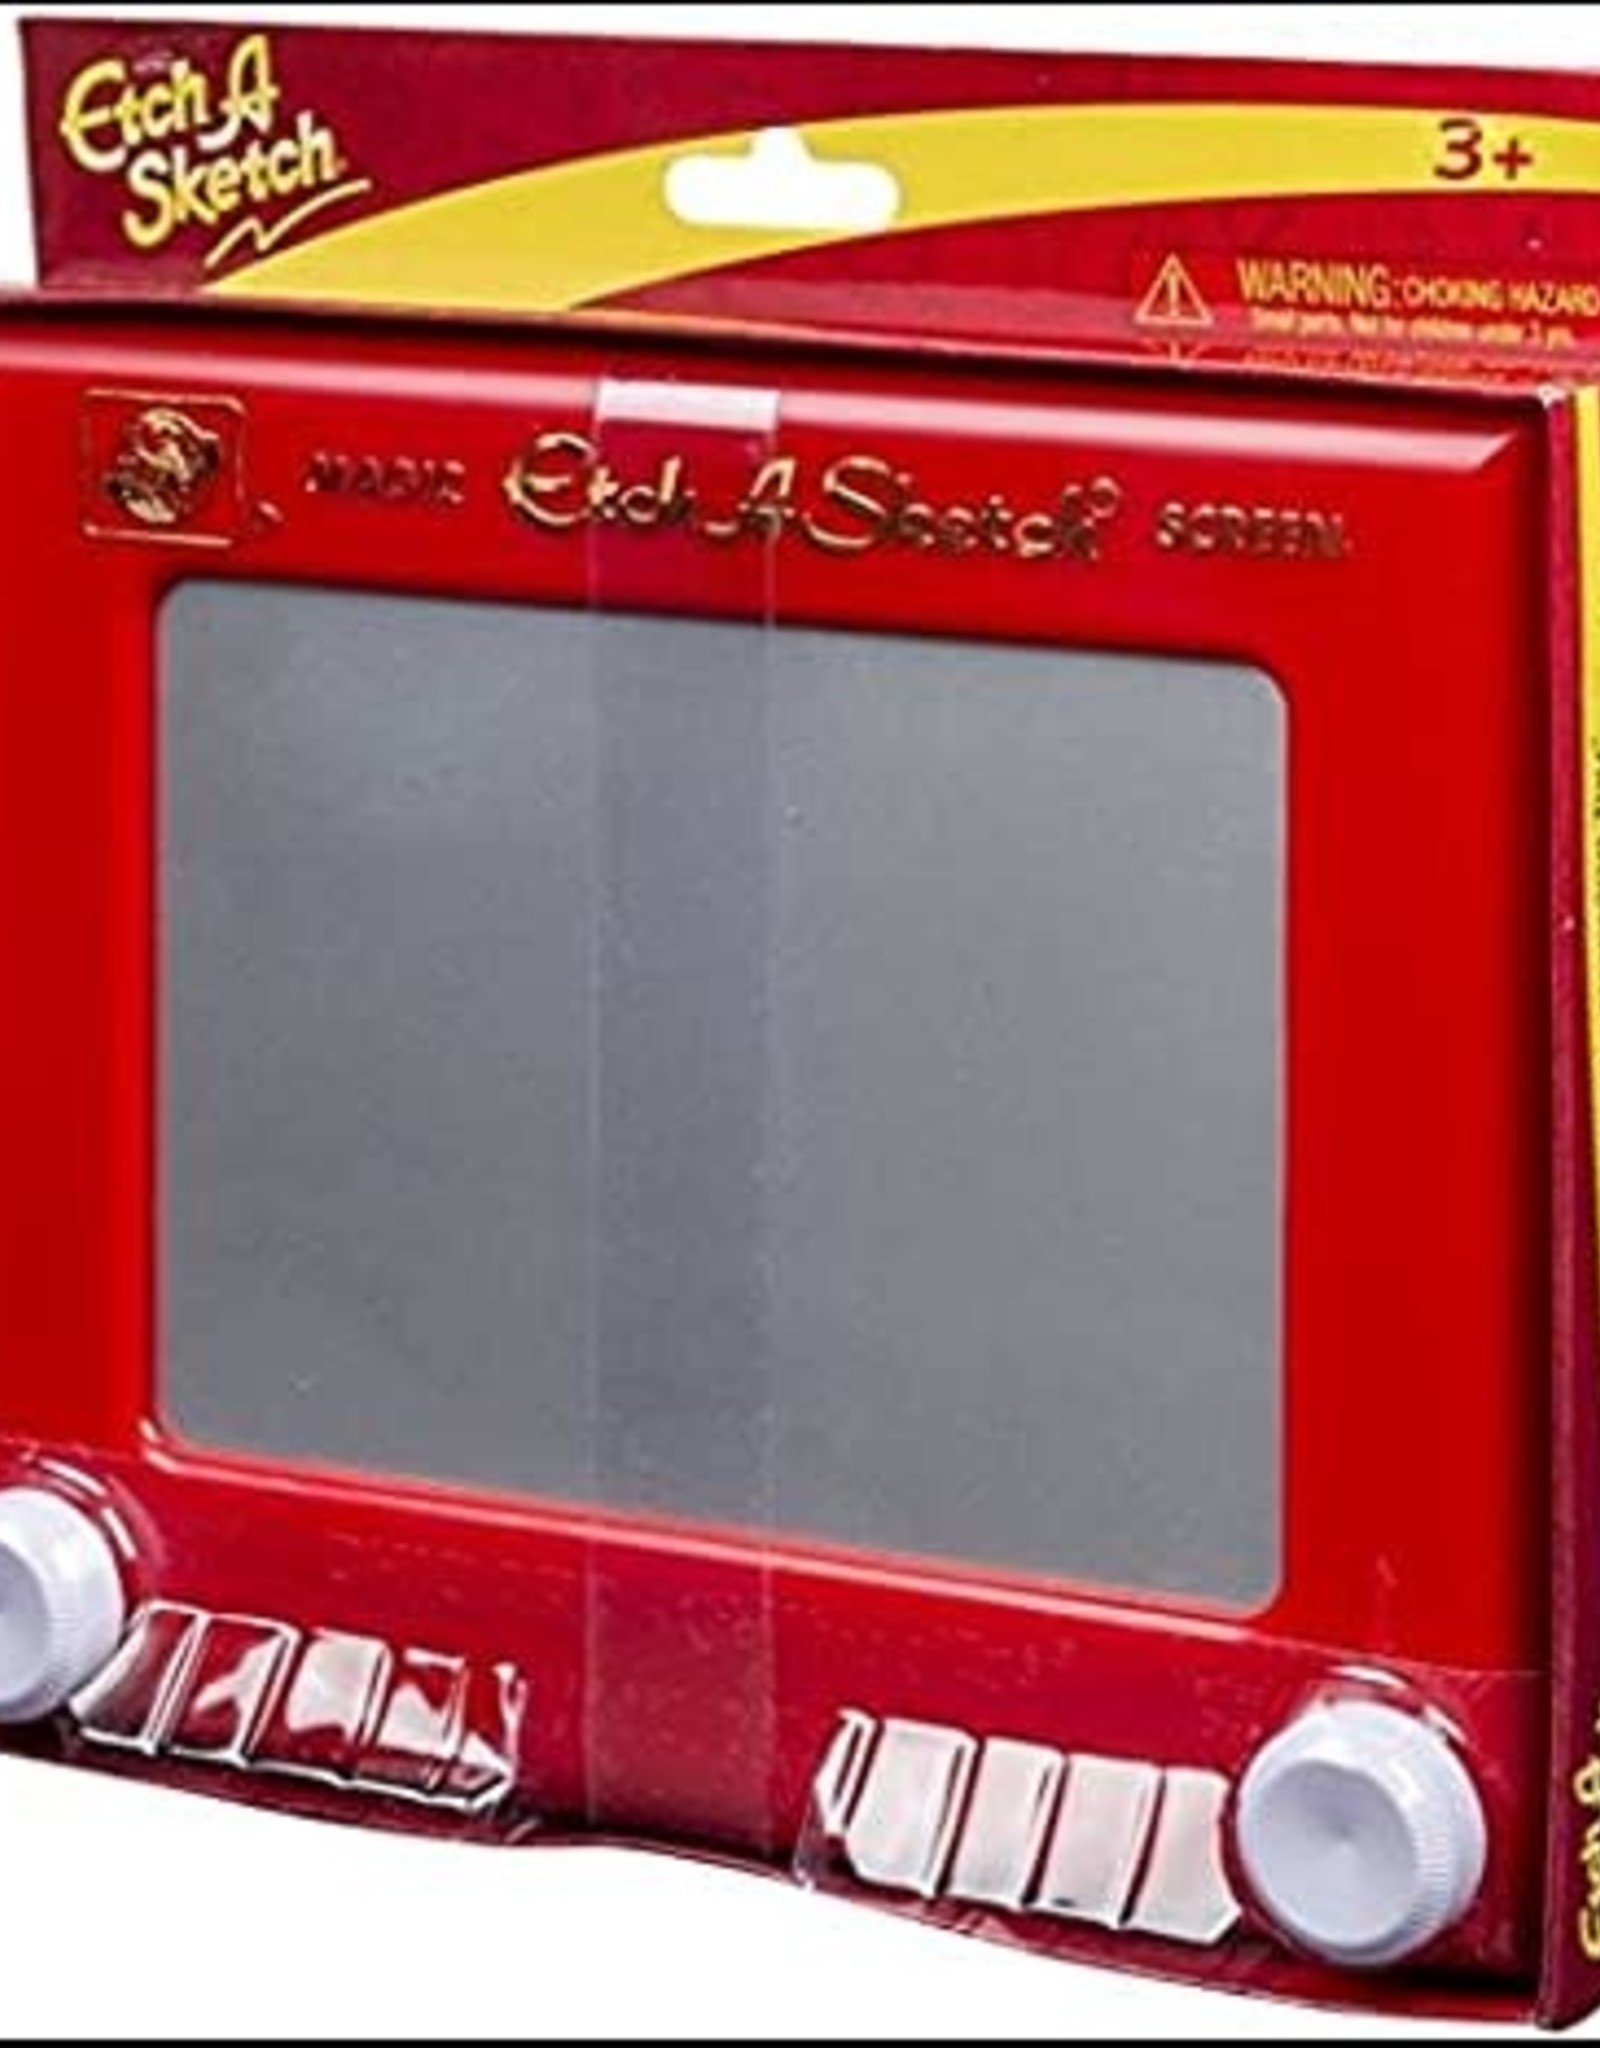 Etch A Sketch Artist Makes Masterpieces On 90's Kids Toy | Localish -  YouTube